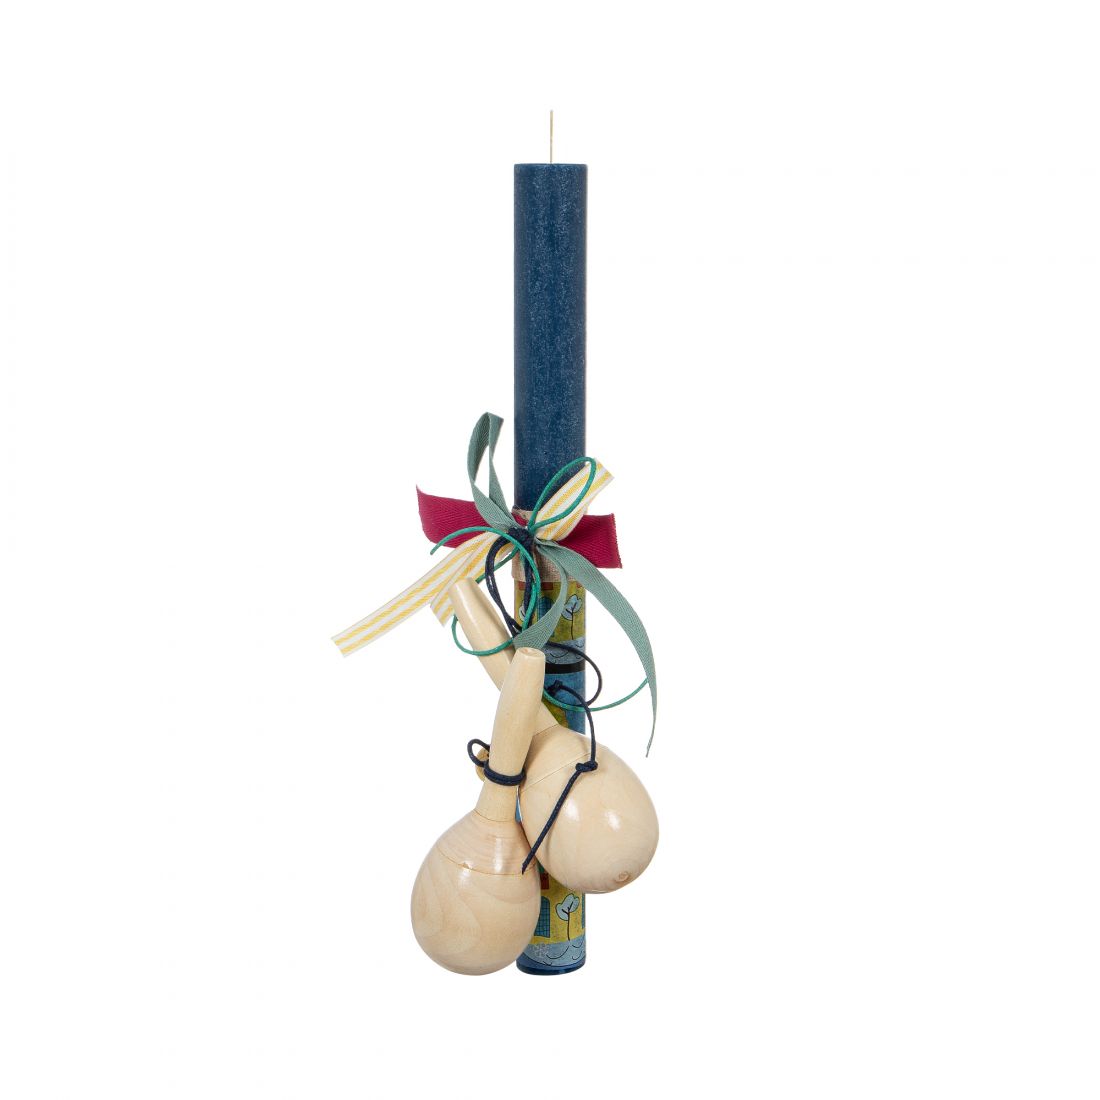 Easter Candle Wooden Maracas